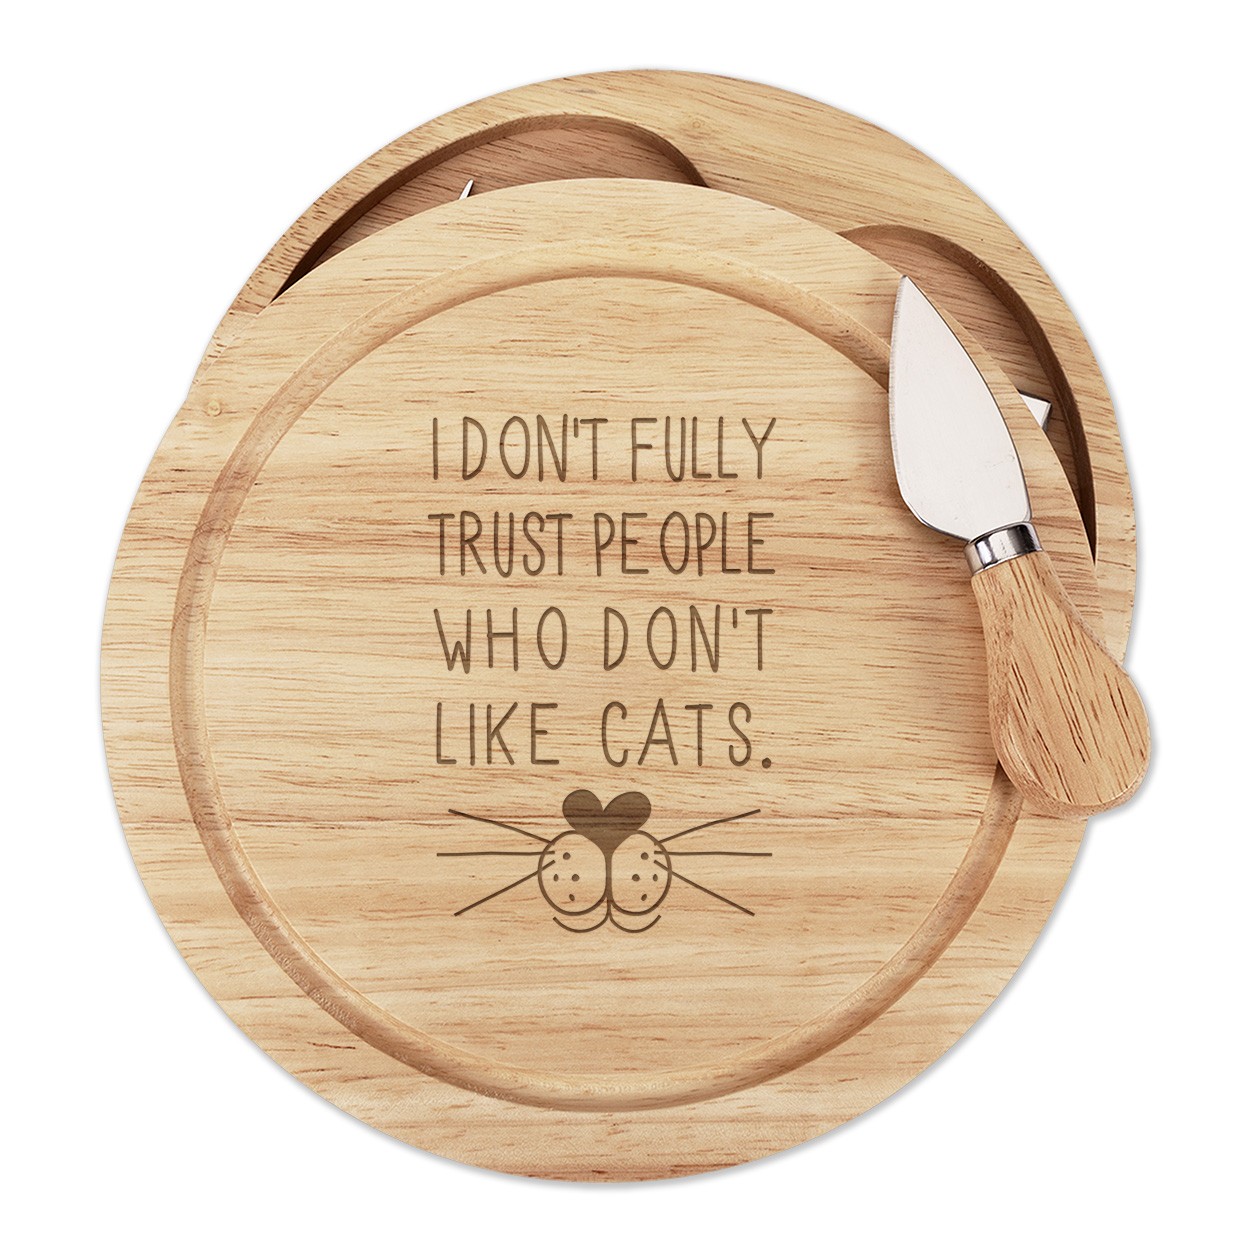 I Don't Fully Trust People Who Don't Like Cats Wooden Cheese Board Set 4 Knives